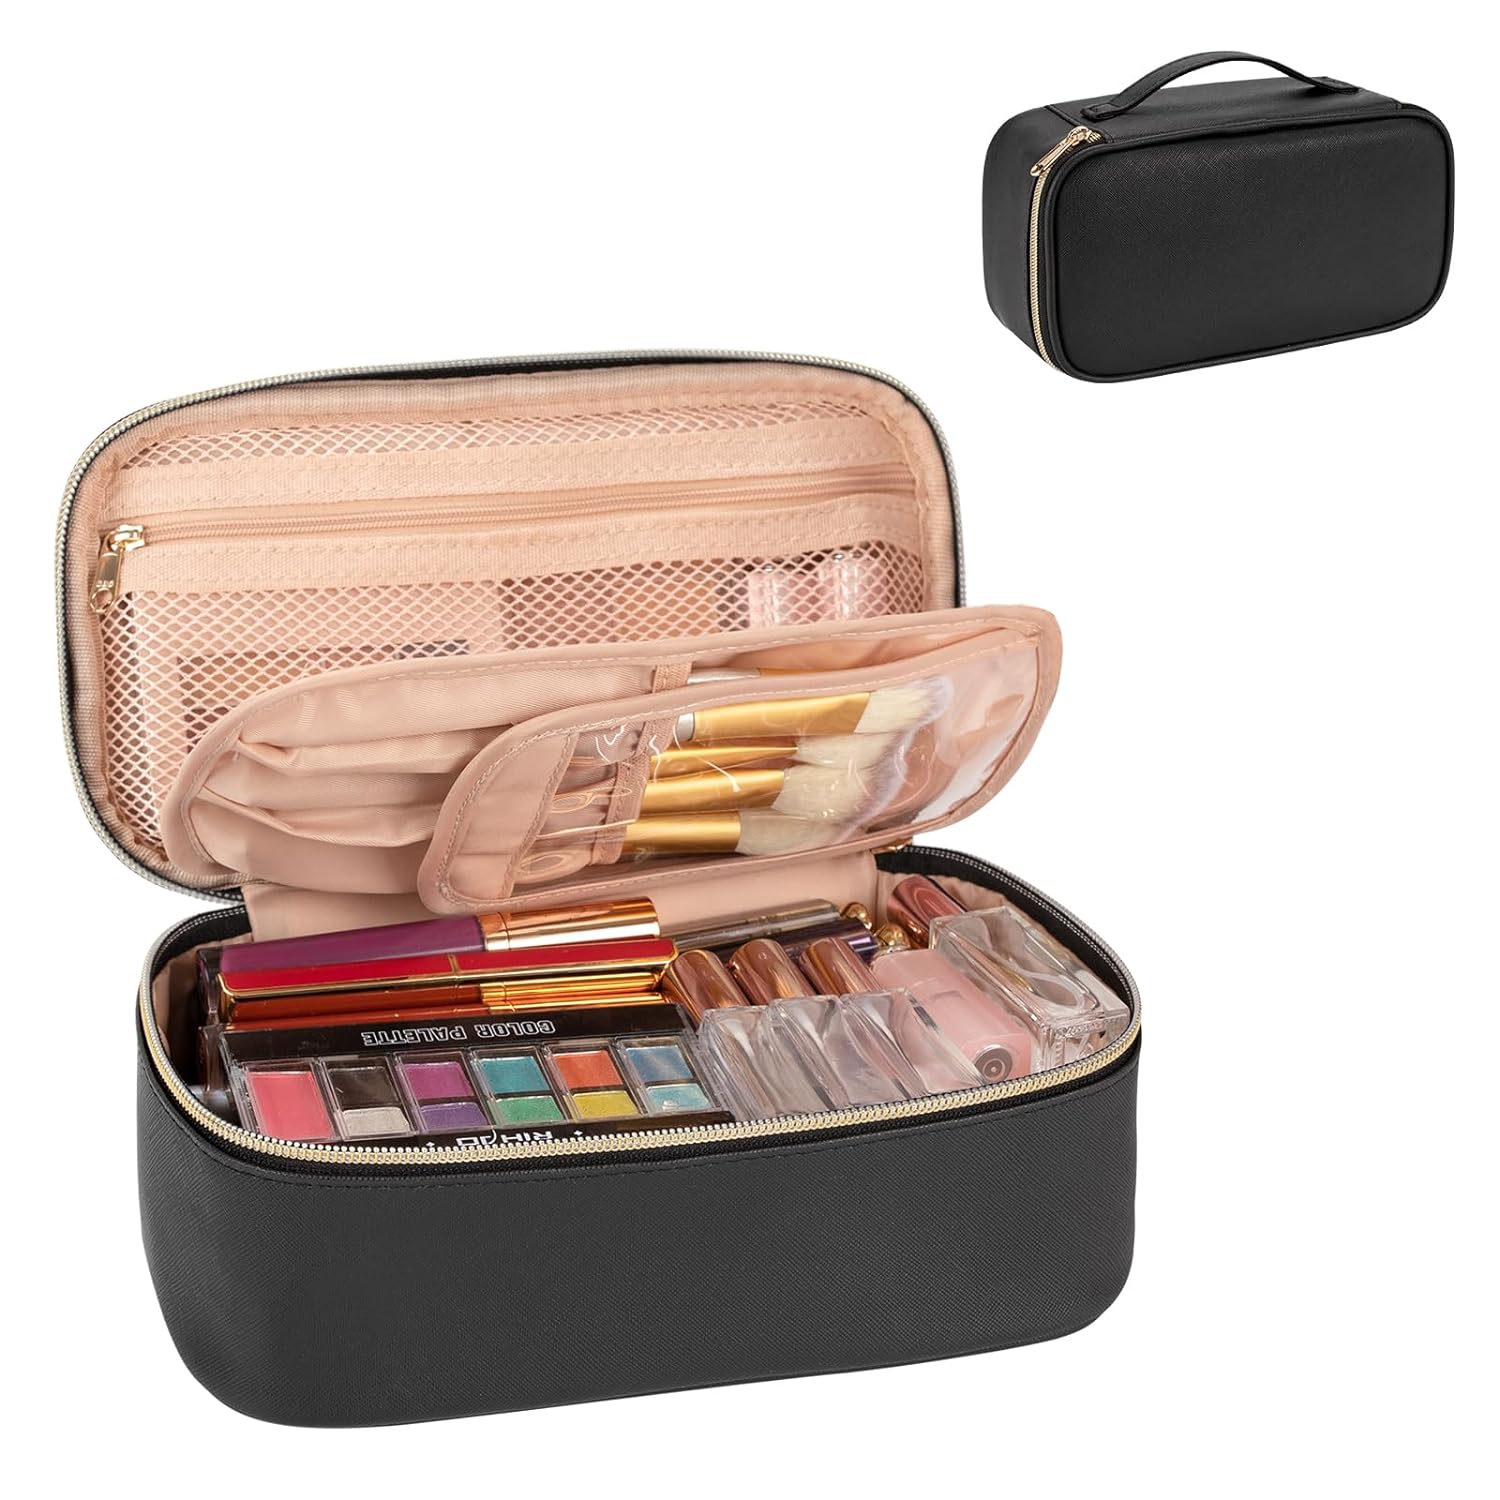 The Small Cosmetic Bag,Portable Cute Travel Makeup Bag for Women and girls Makeup Brush Organizer cosmetics Pouch Bags-Black